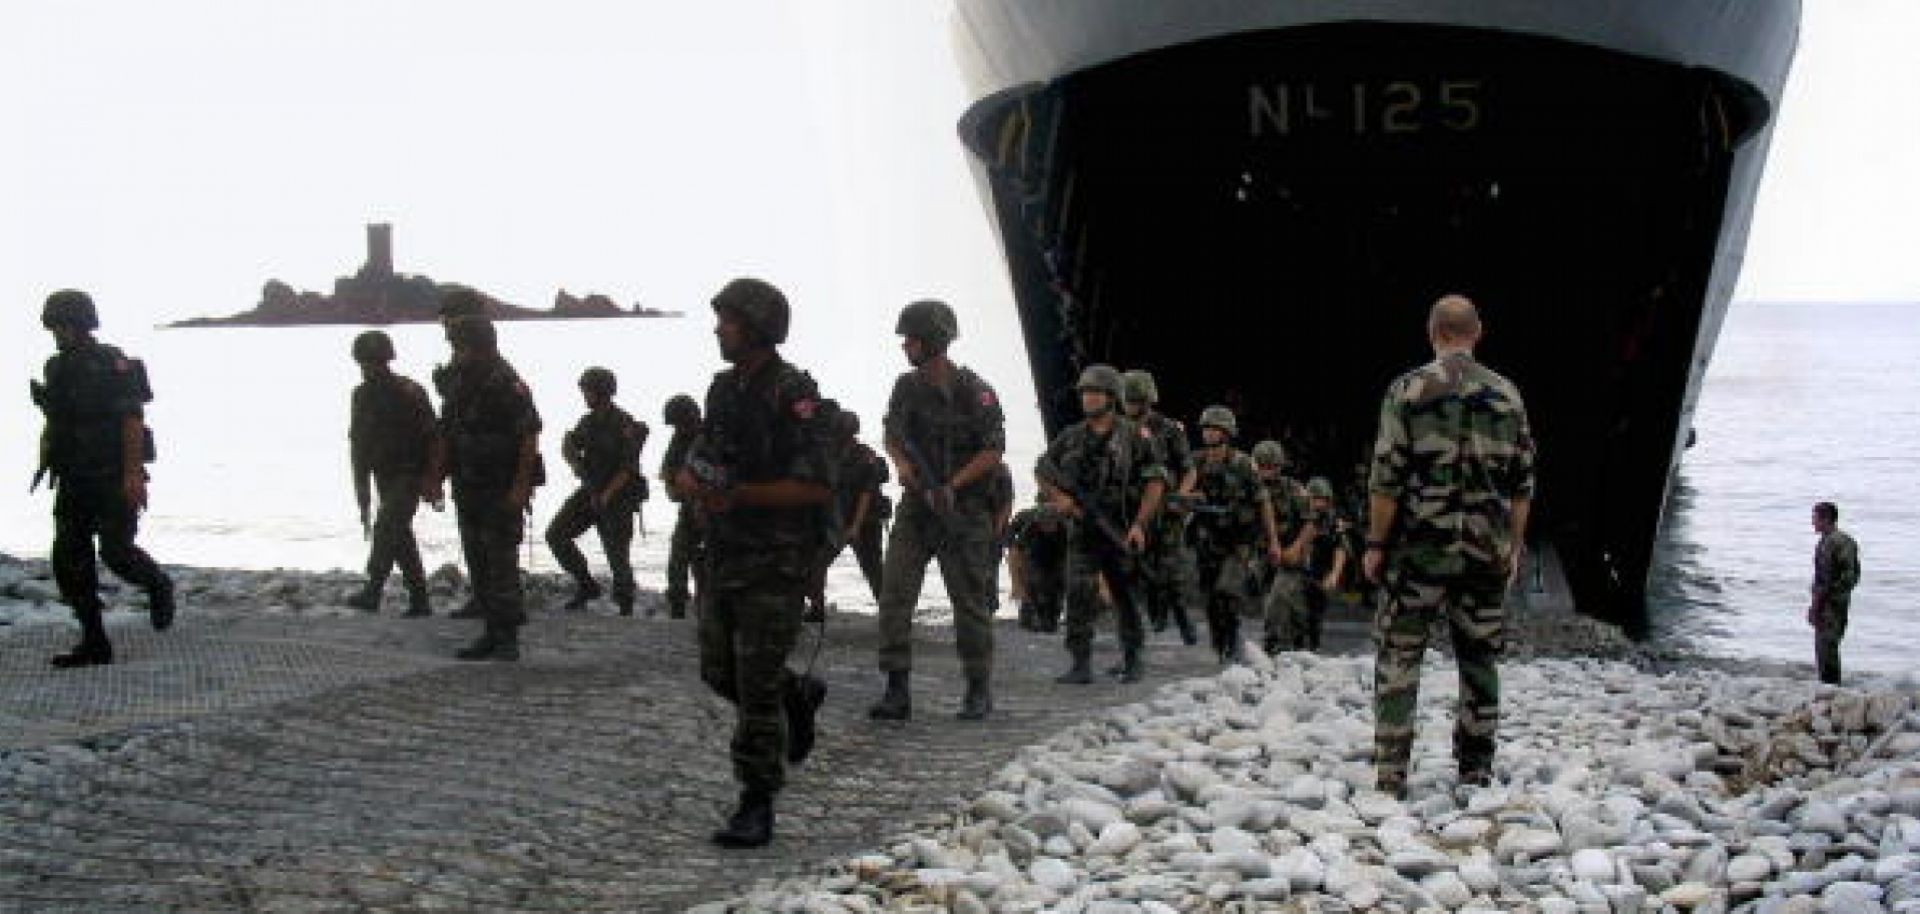 Turkish troops exit a landing ship during a training exercise in France